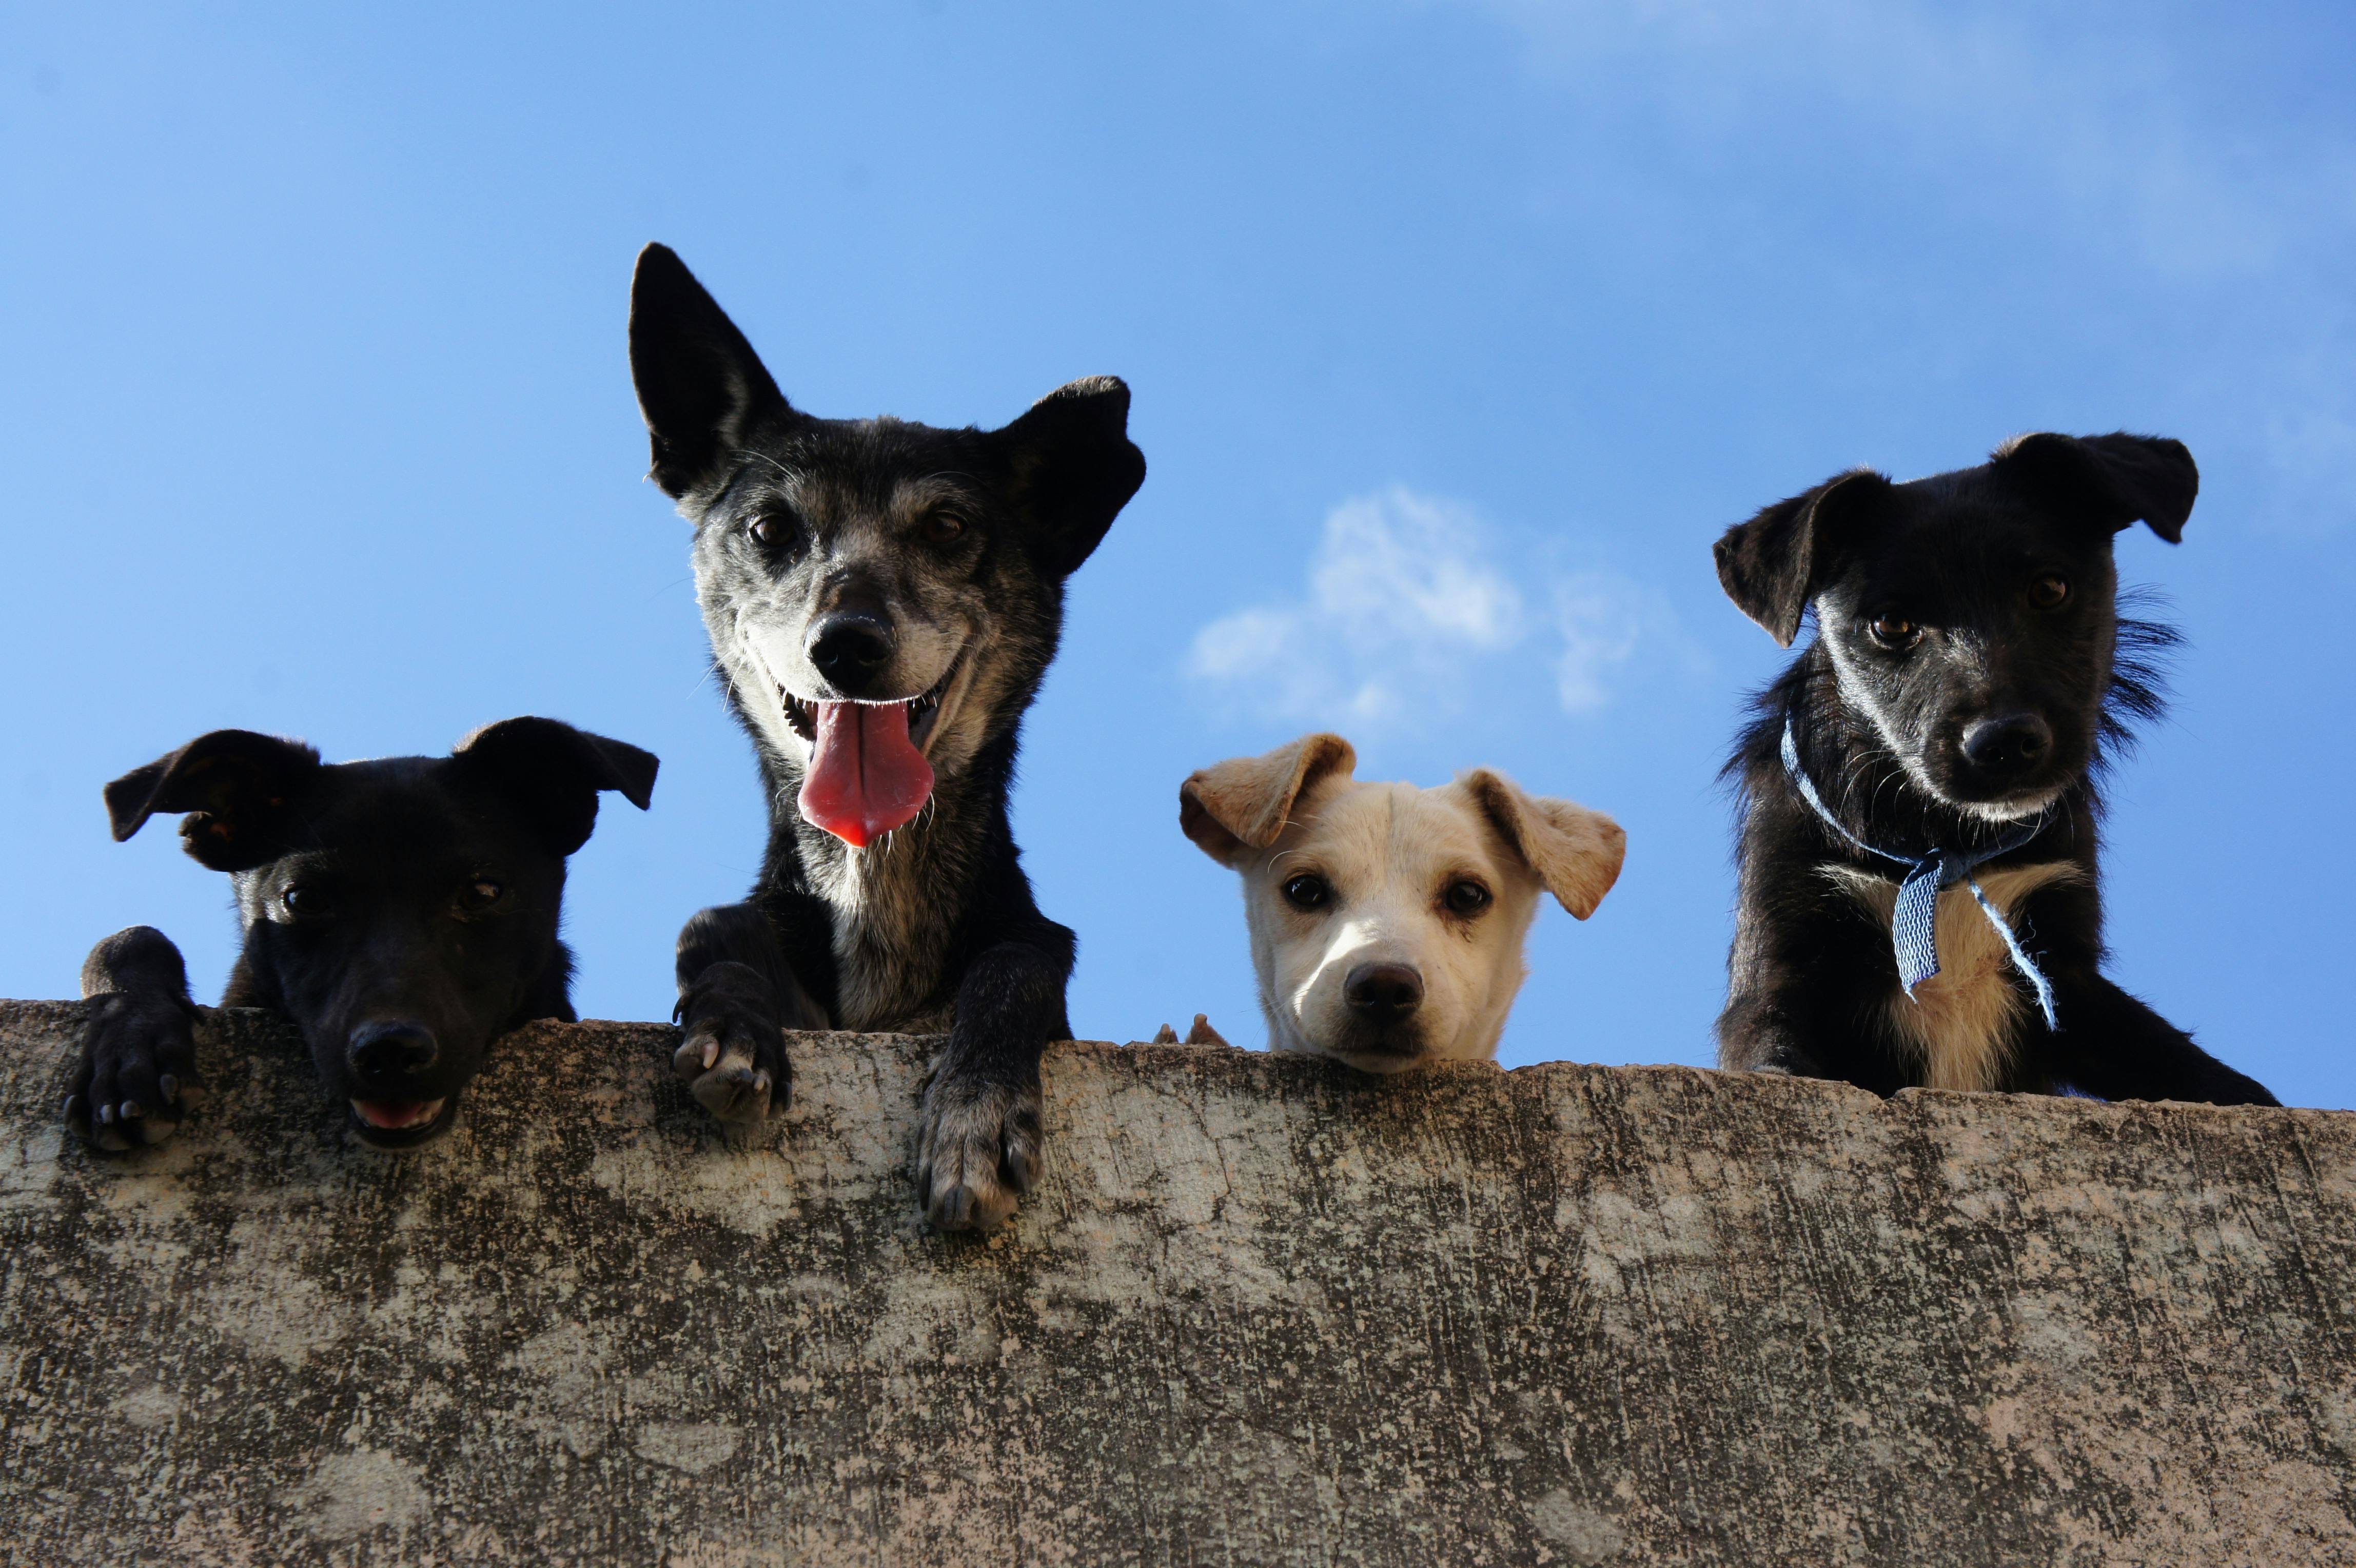 Four dogs looking down | Source: Pexels